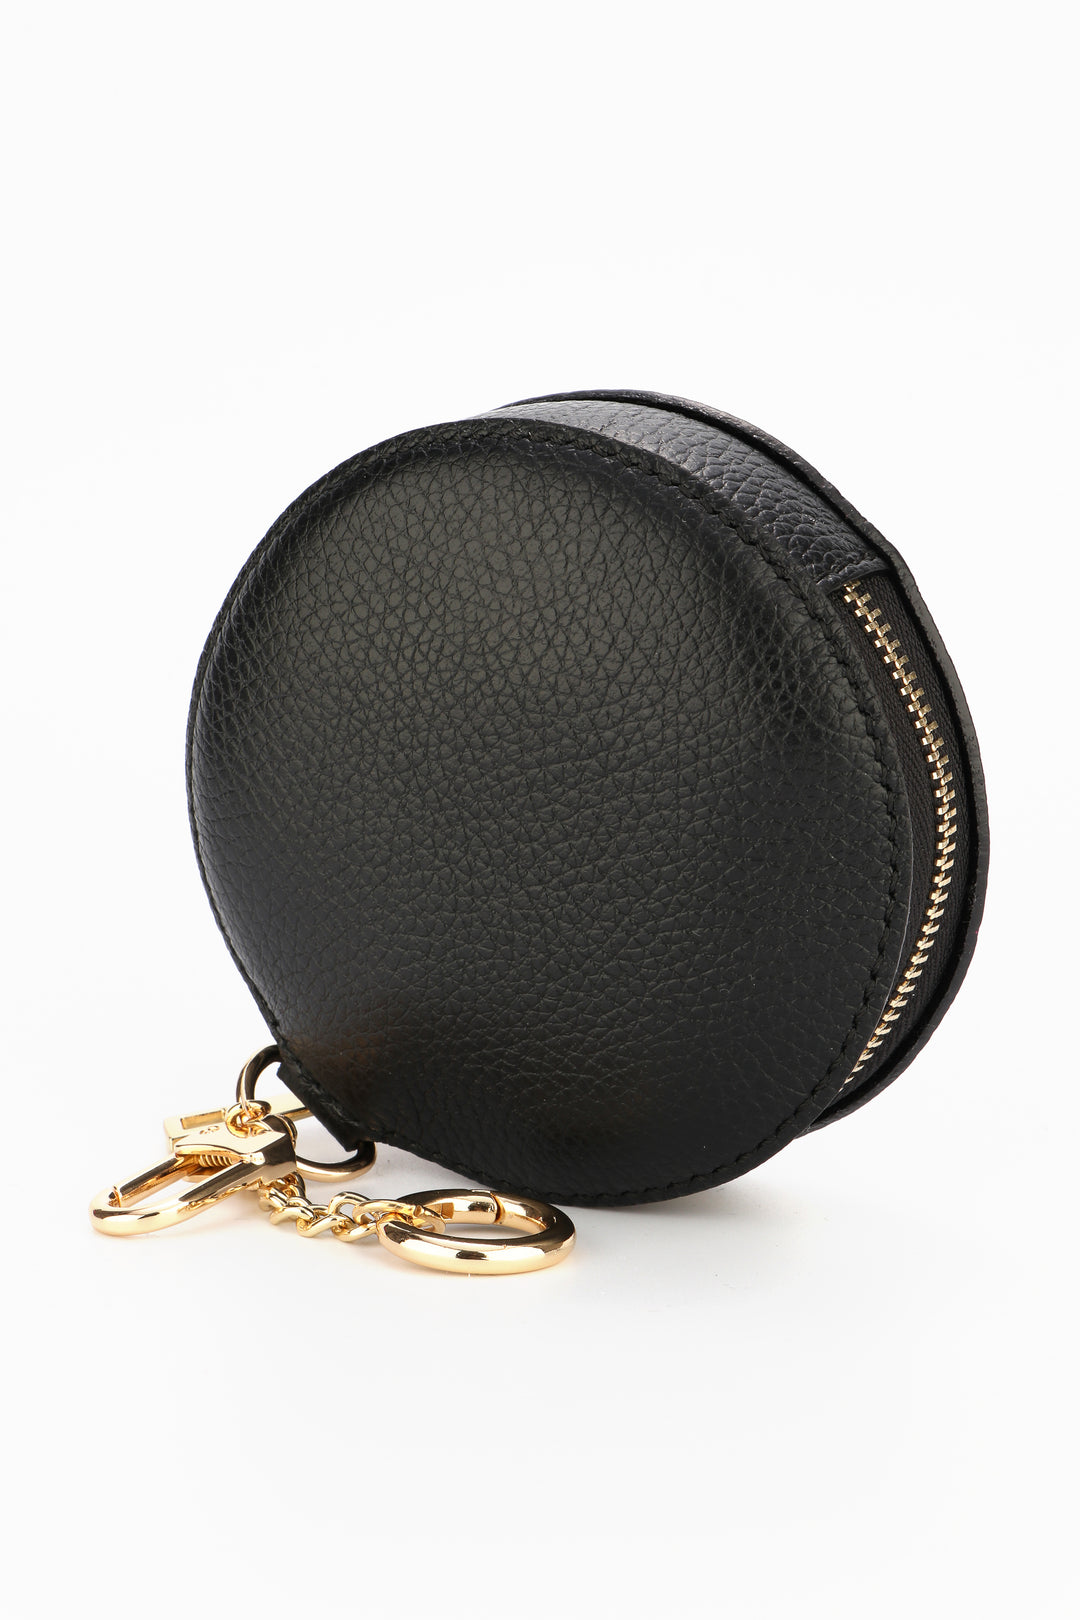 black leather round coin purse with gold zip closure and gold keychain attachments